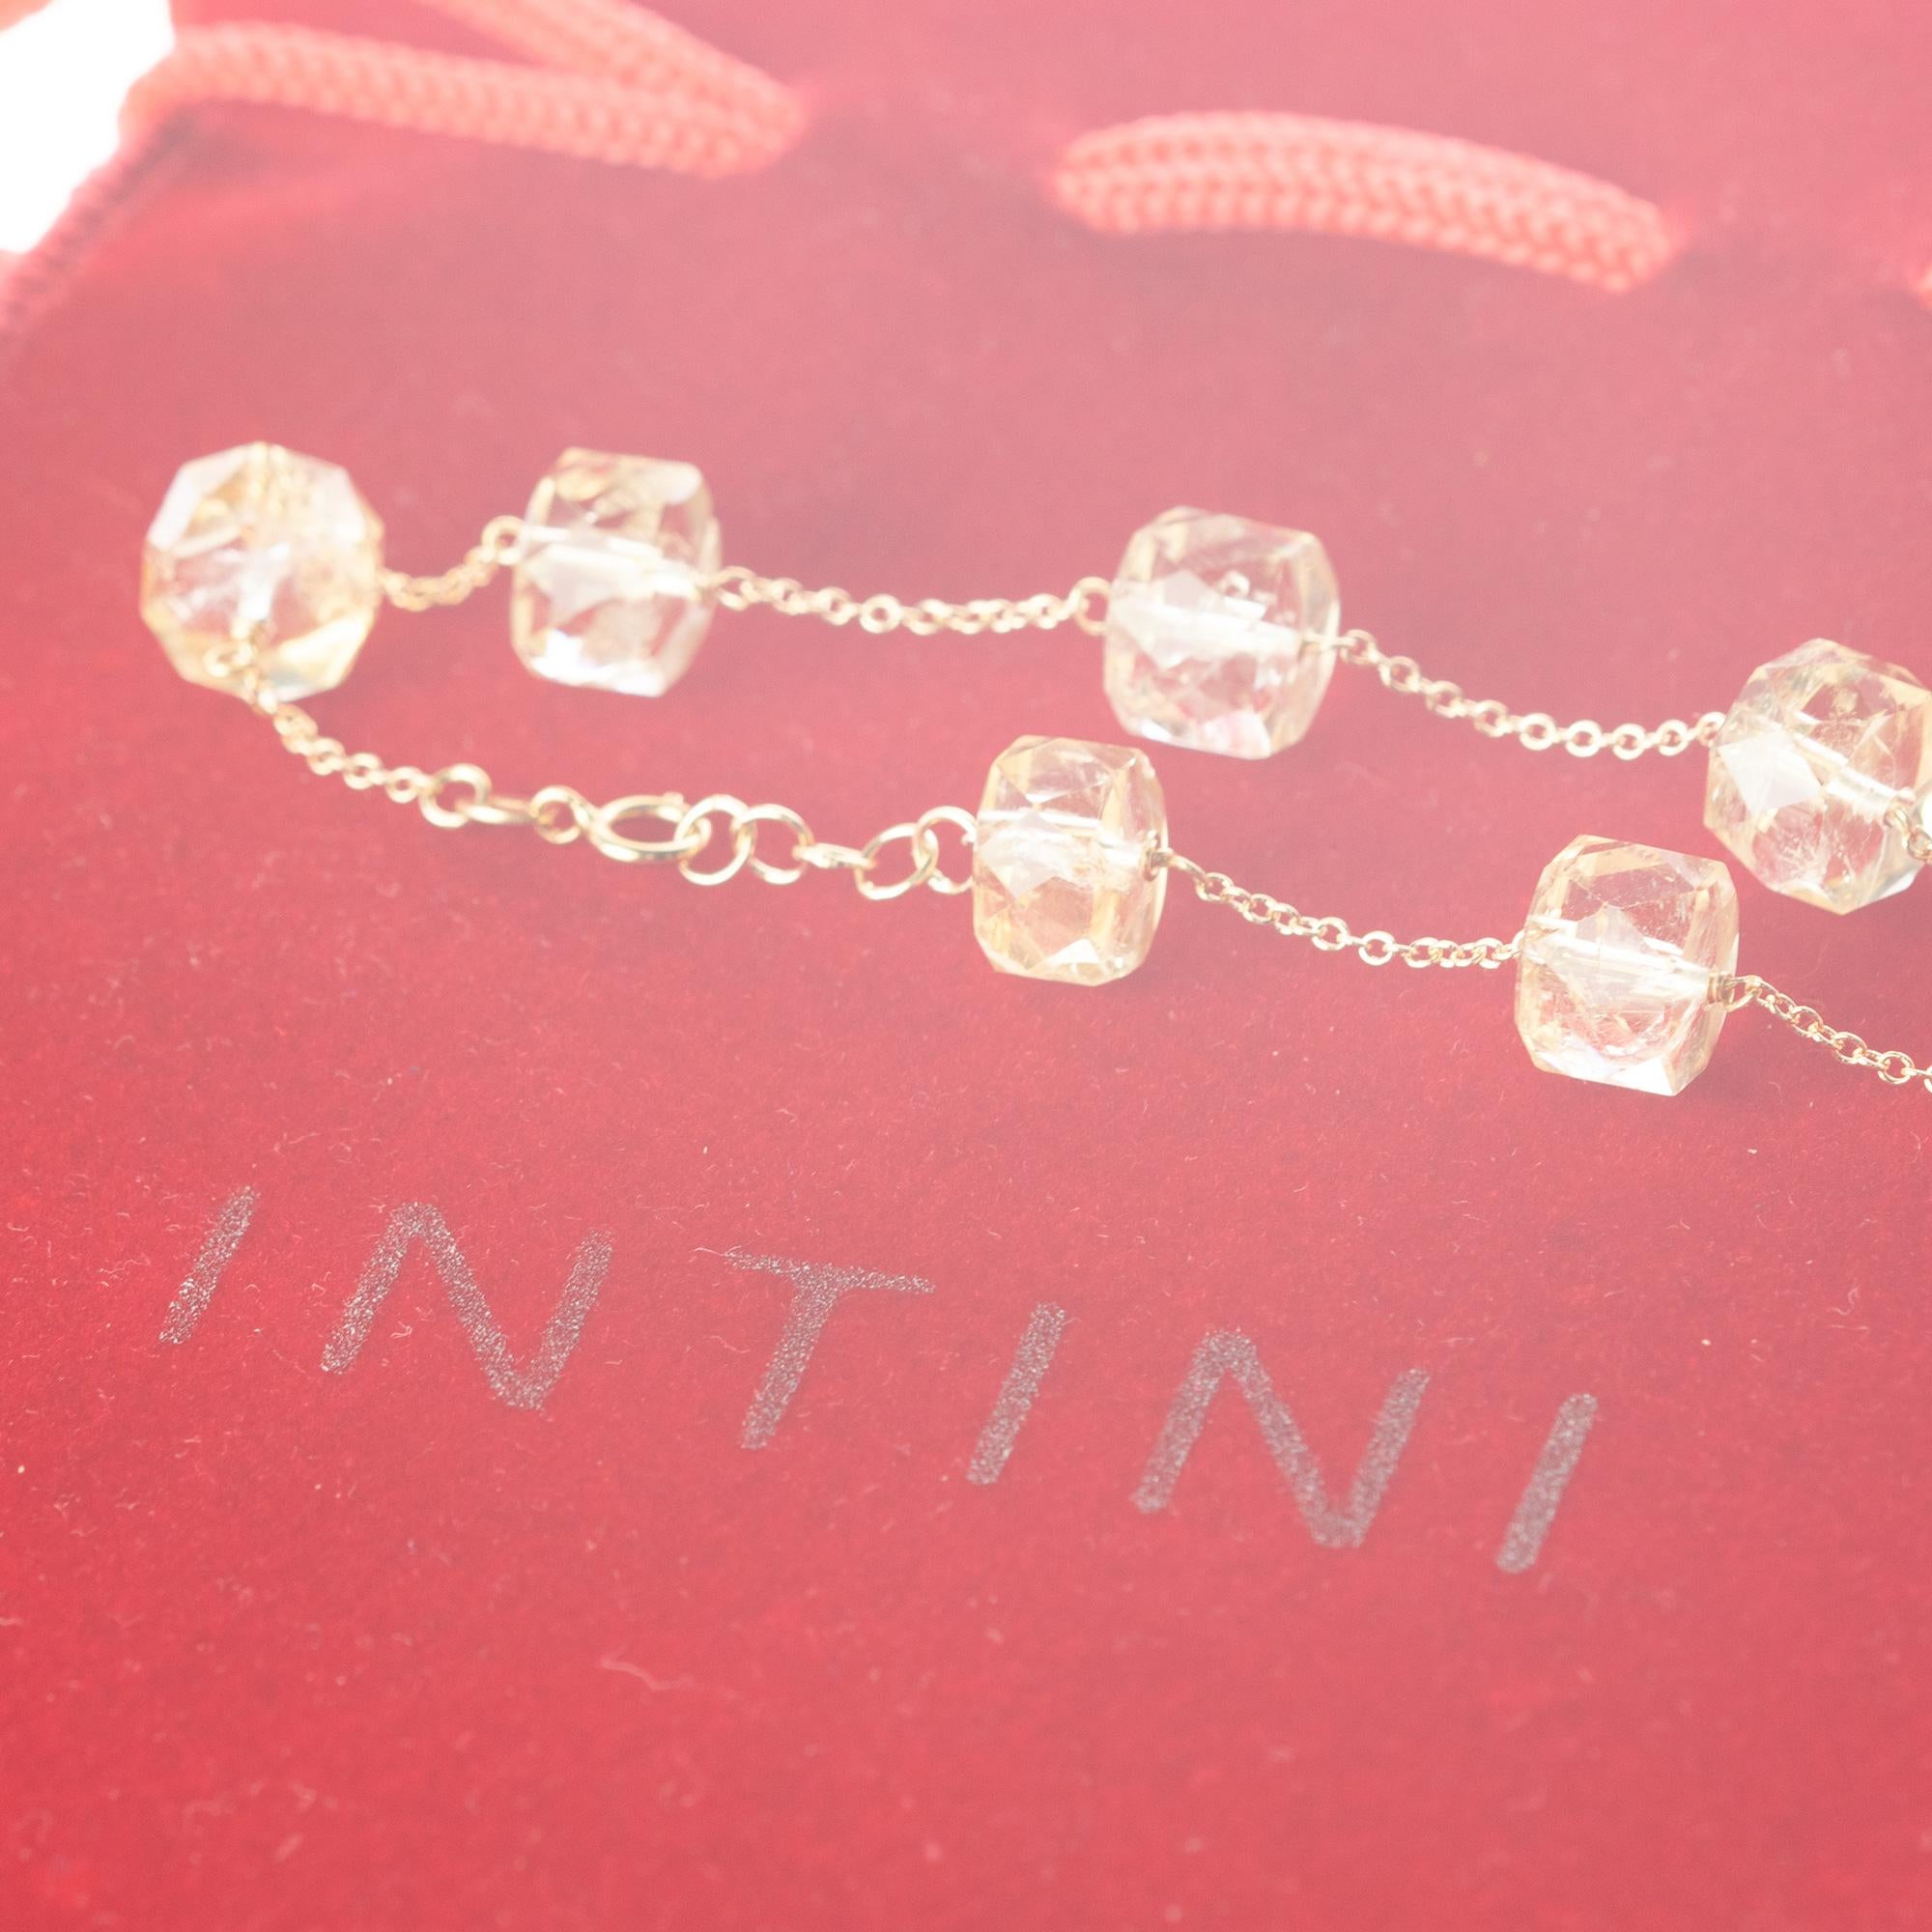 Intini Jewels signature quality on a modern and contemporary design jewel.

Six gems of top quality pure citrine quartz embellish a delicate 14 karat yellow gold chain bracelet.

An elegant touch of glamour at your fingertips. Let yourself be